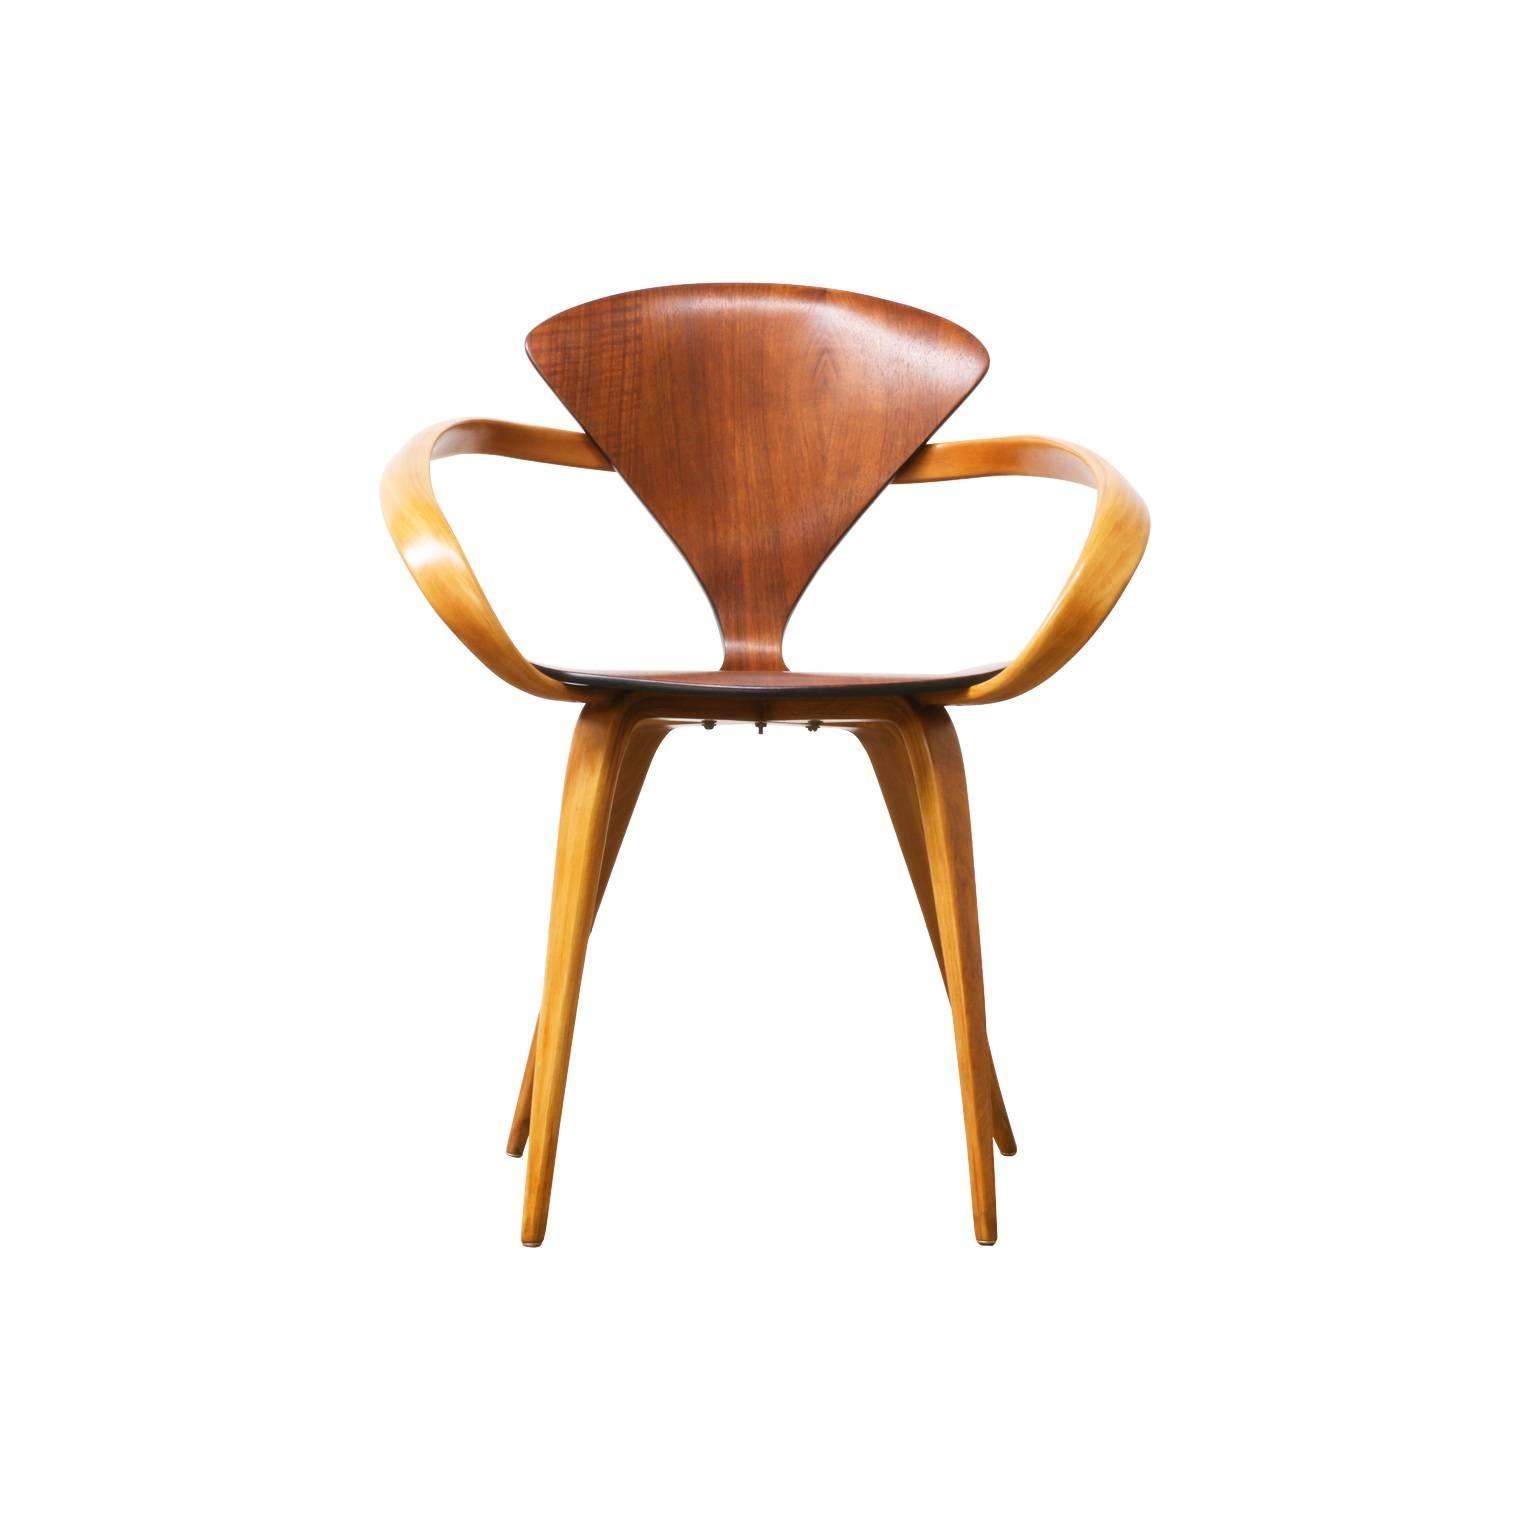 Designer: Norman Cherner.
Manufacturer: Plycraft.
Period/Style: Mid-Century Modern.
Country: United States.
Date: 1950s.

Dimensions: 31″ H x 23.5″ L x 26″ W.
Seat height 17″.
Materials: Walnut, beechwood.
Condition: Excellent, newly